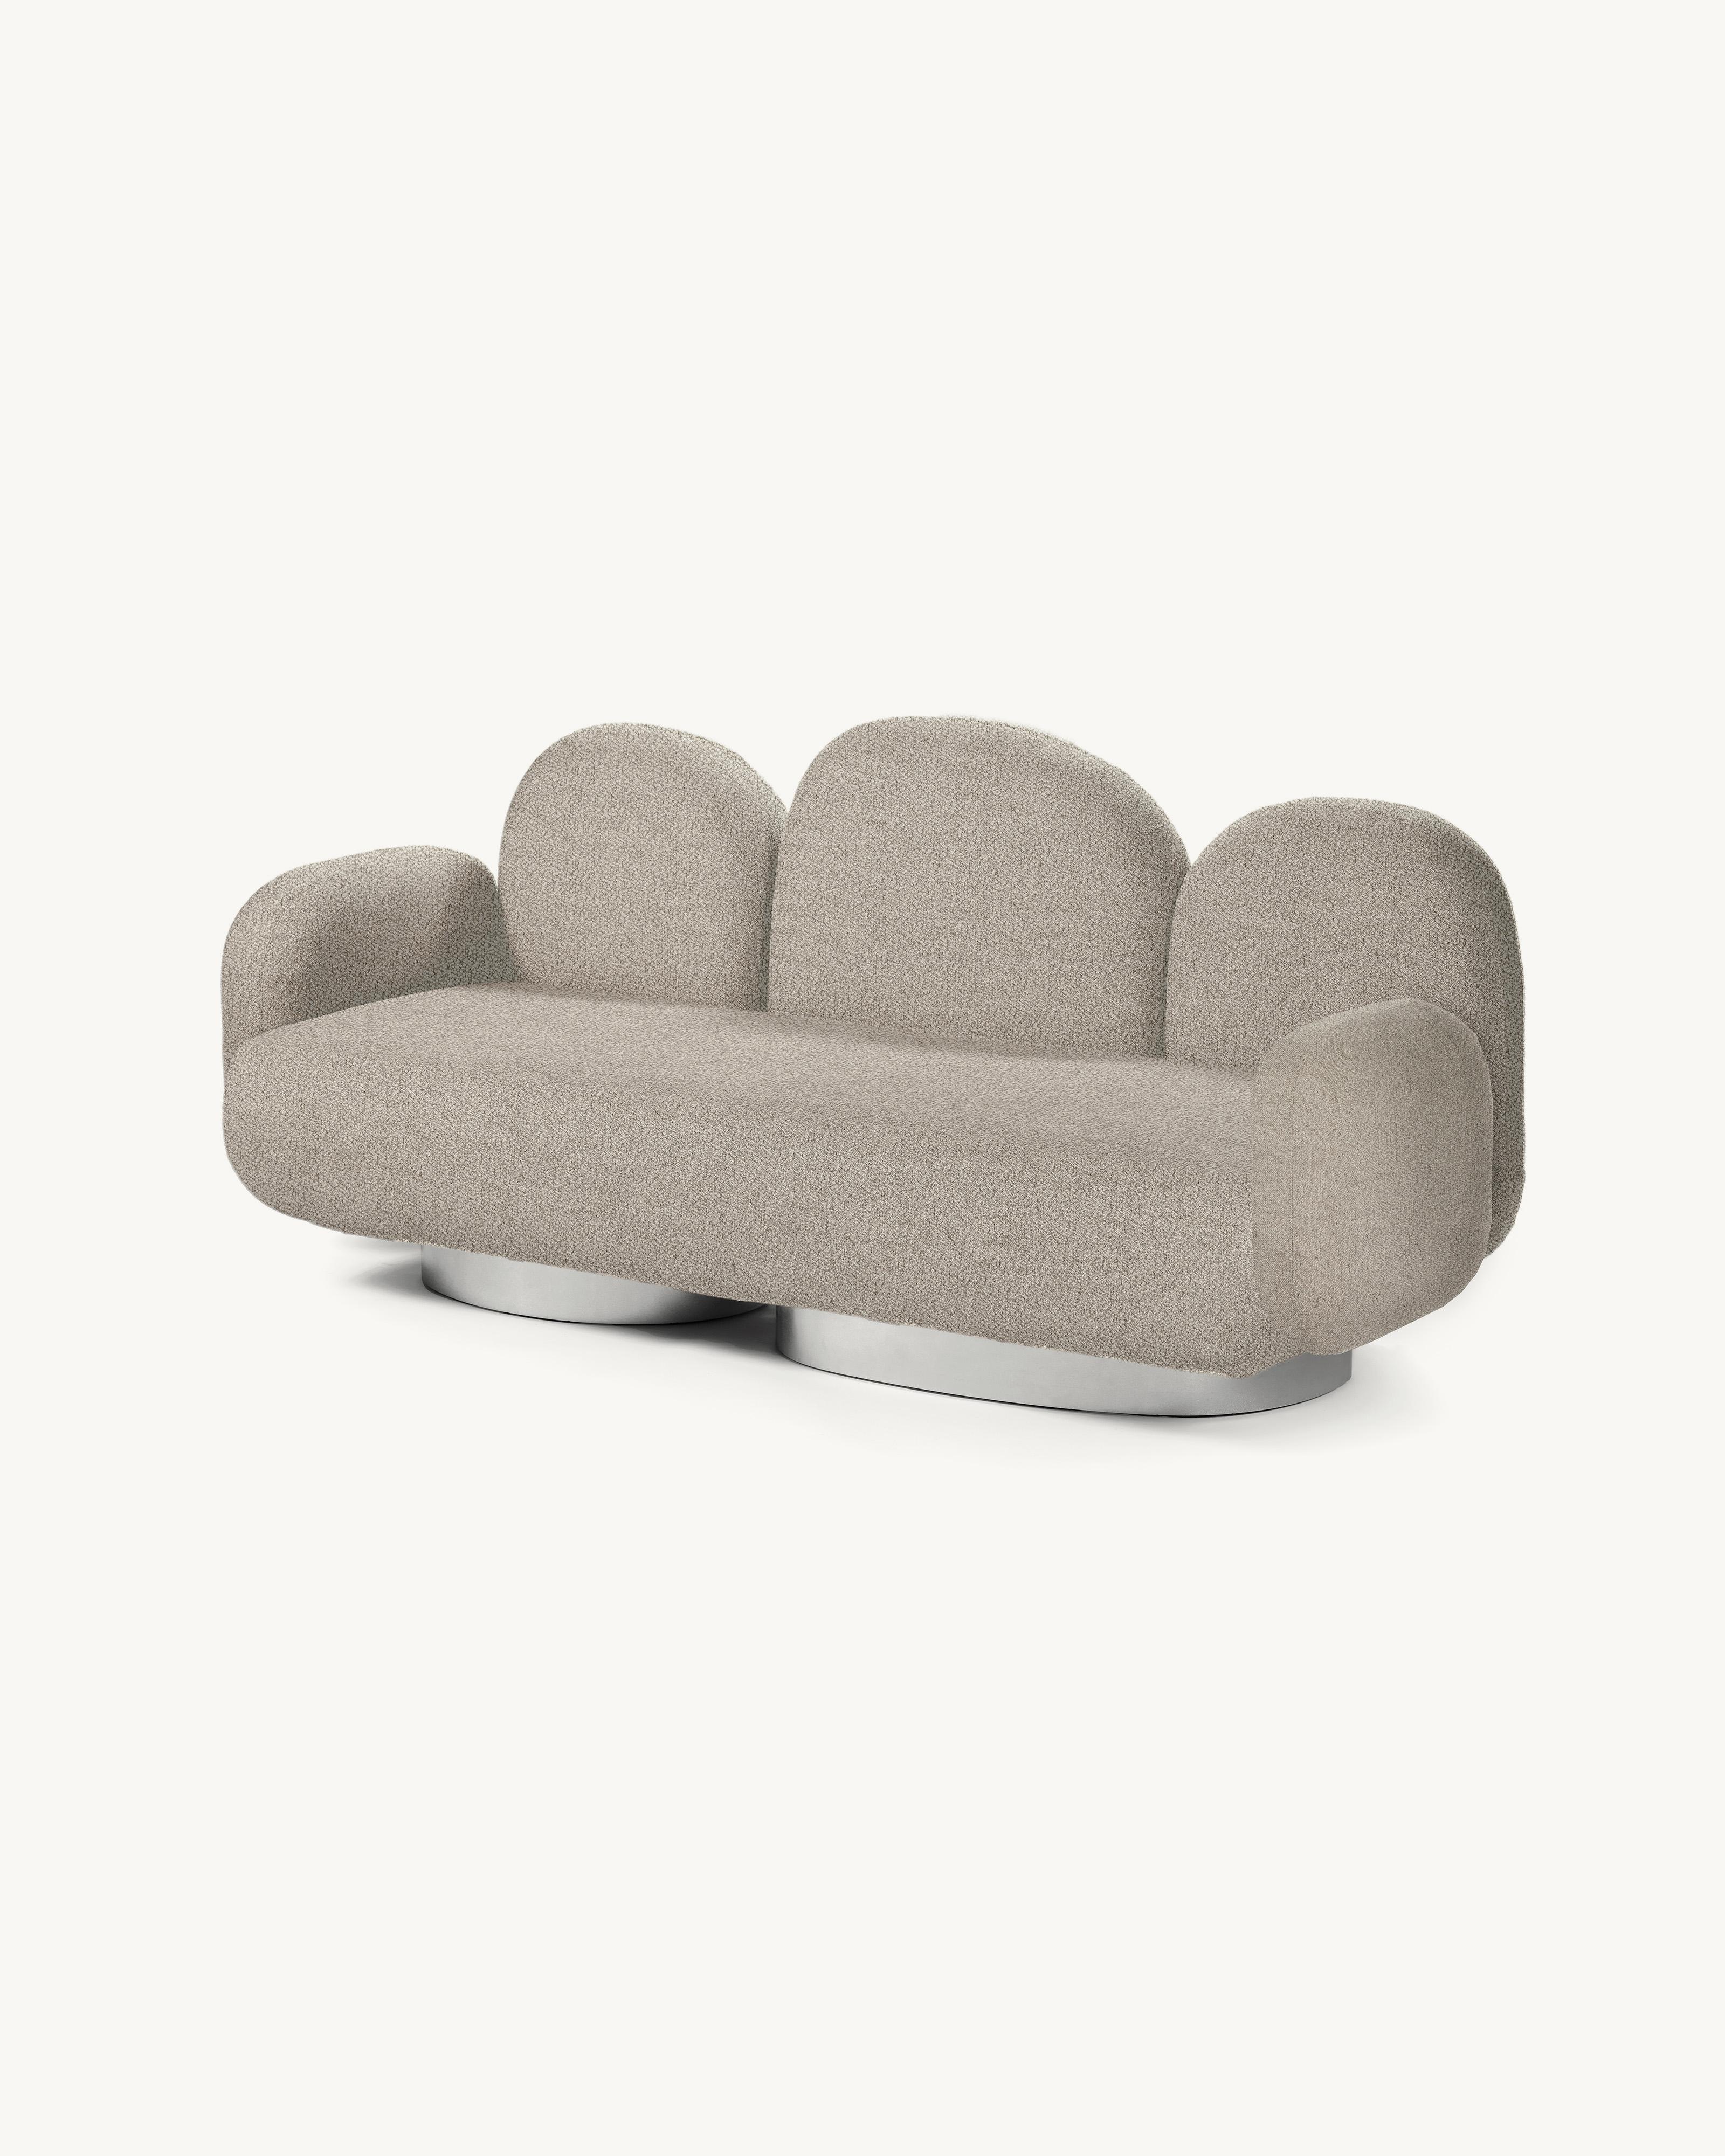 Modular Sofa Assemble 2-seat-sofa with 2 armrests 
Designed by Destroyers/Builders x Valerie Objects
Upholstery: Bangar Sand (V9020342)

Dimensions: L 87 W 213 H 85CM (SH 40 cm)
Materials: Wood, aluminium and upholstery

The ASSEMBLE sofa encourages